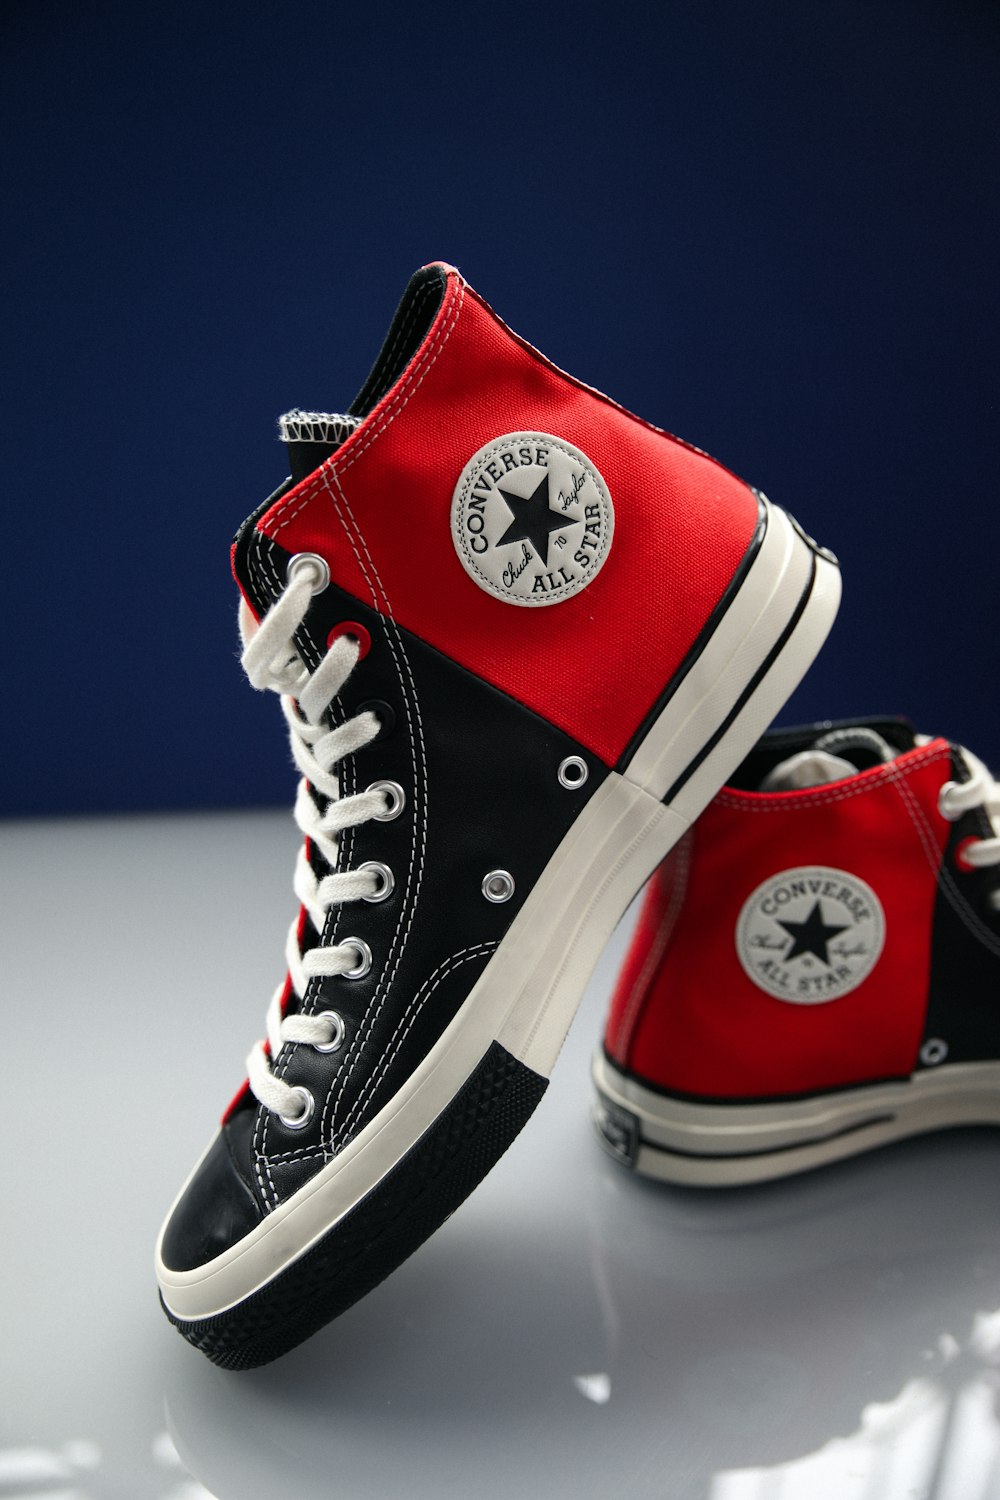 Red converse all star high top sneakers photo – Free Red Image on Unsplash